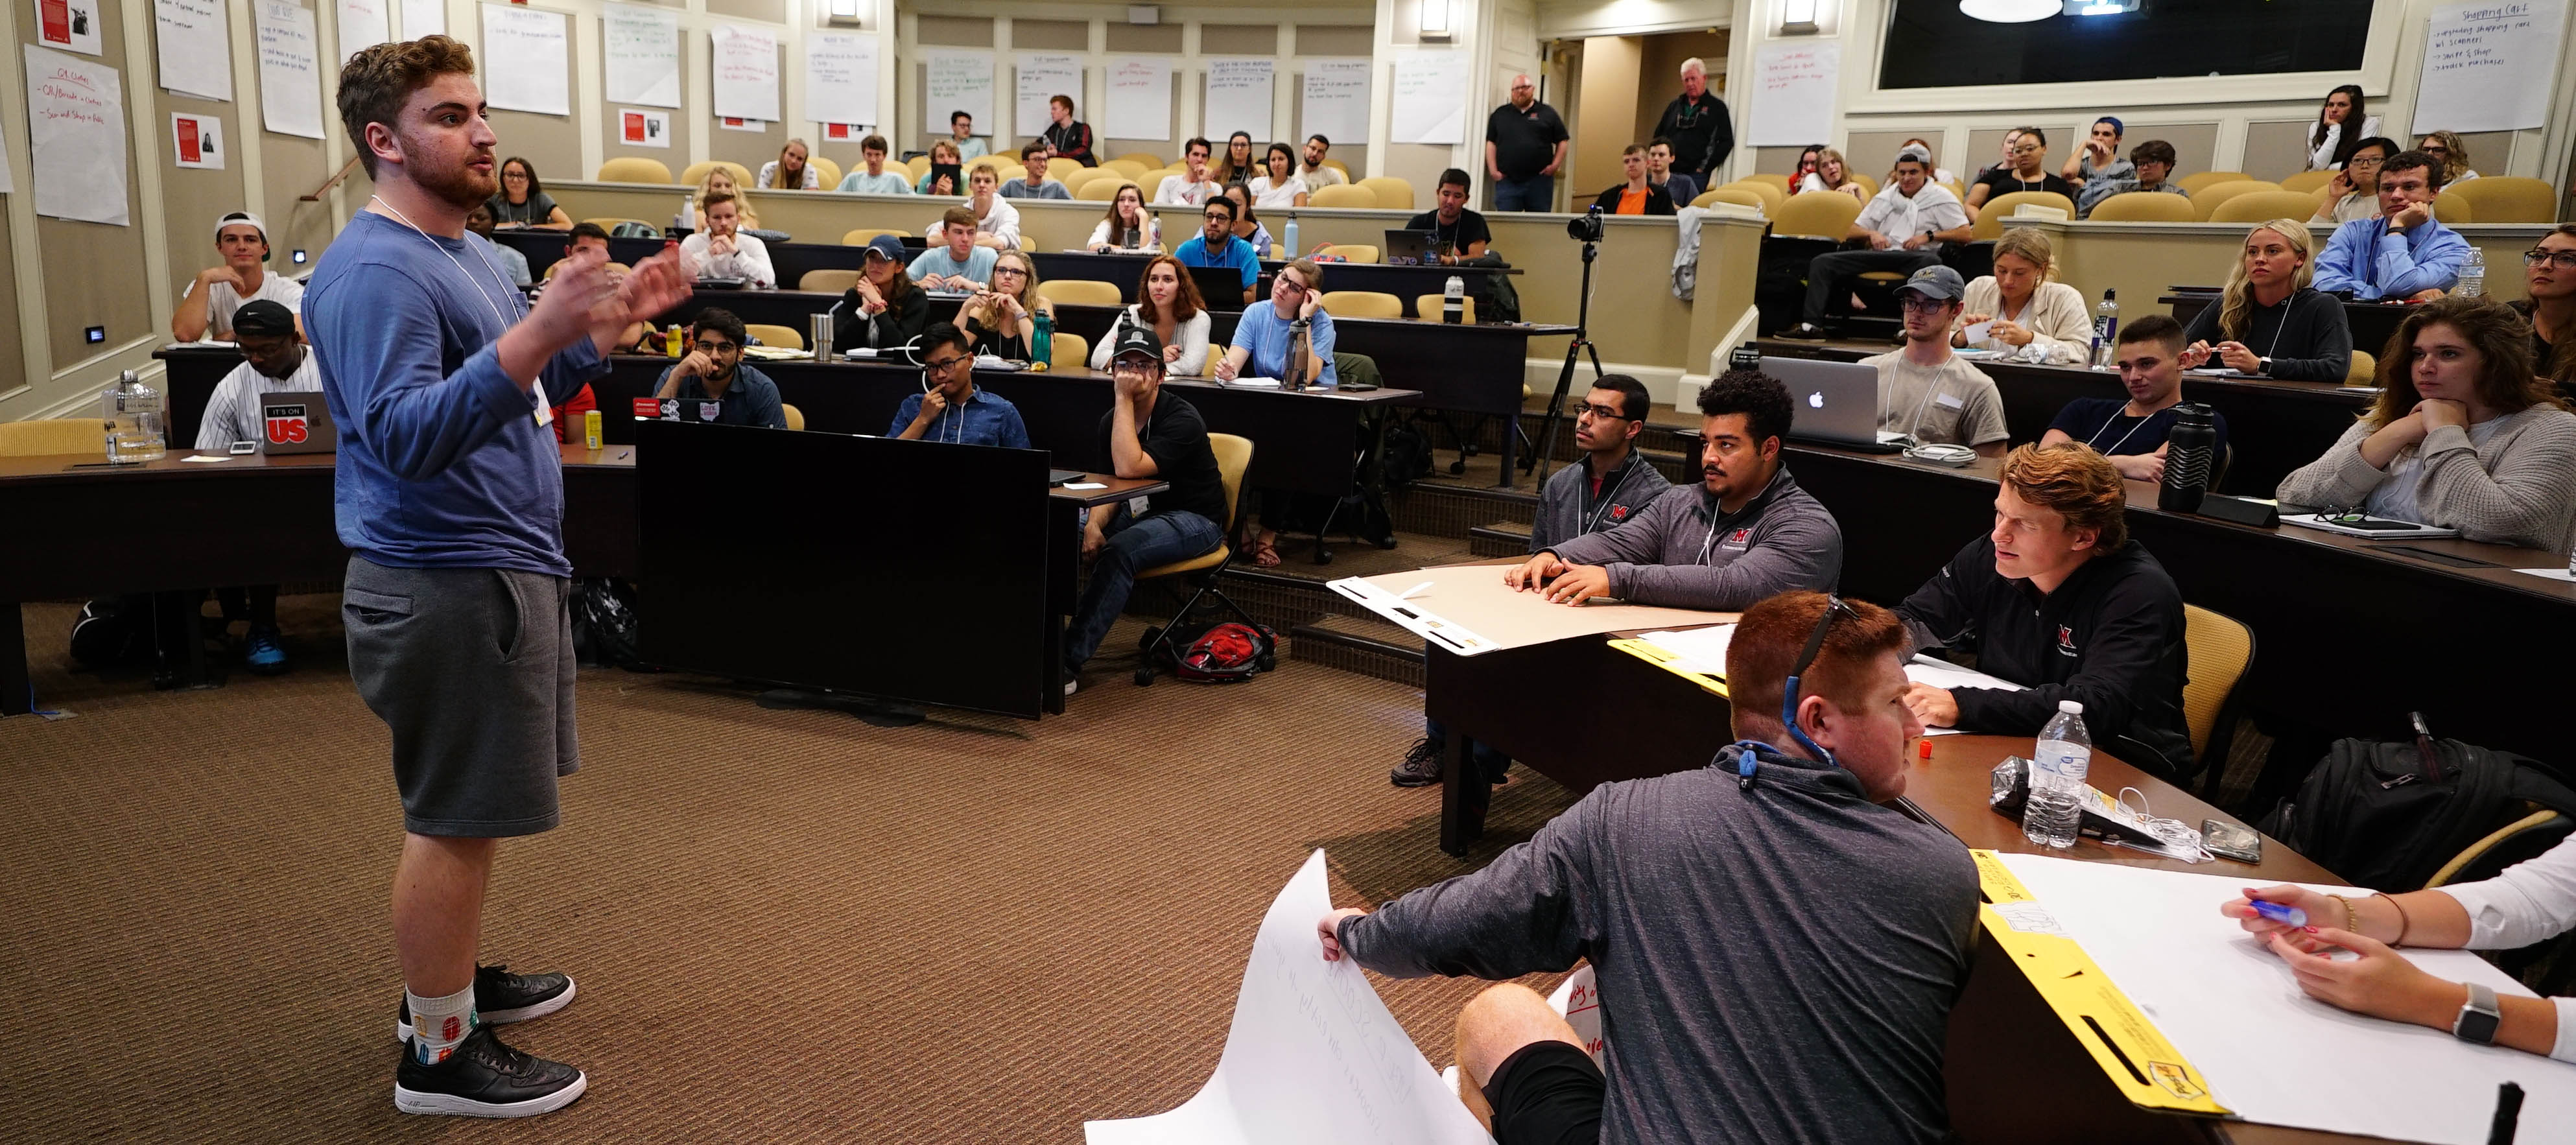 Student makes pitch to crowd at Startup Weekend